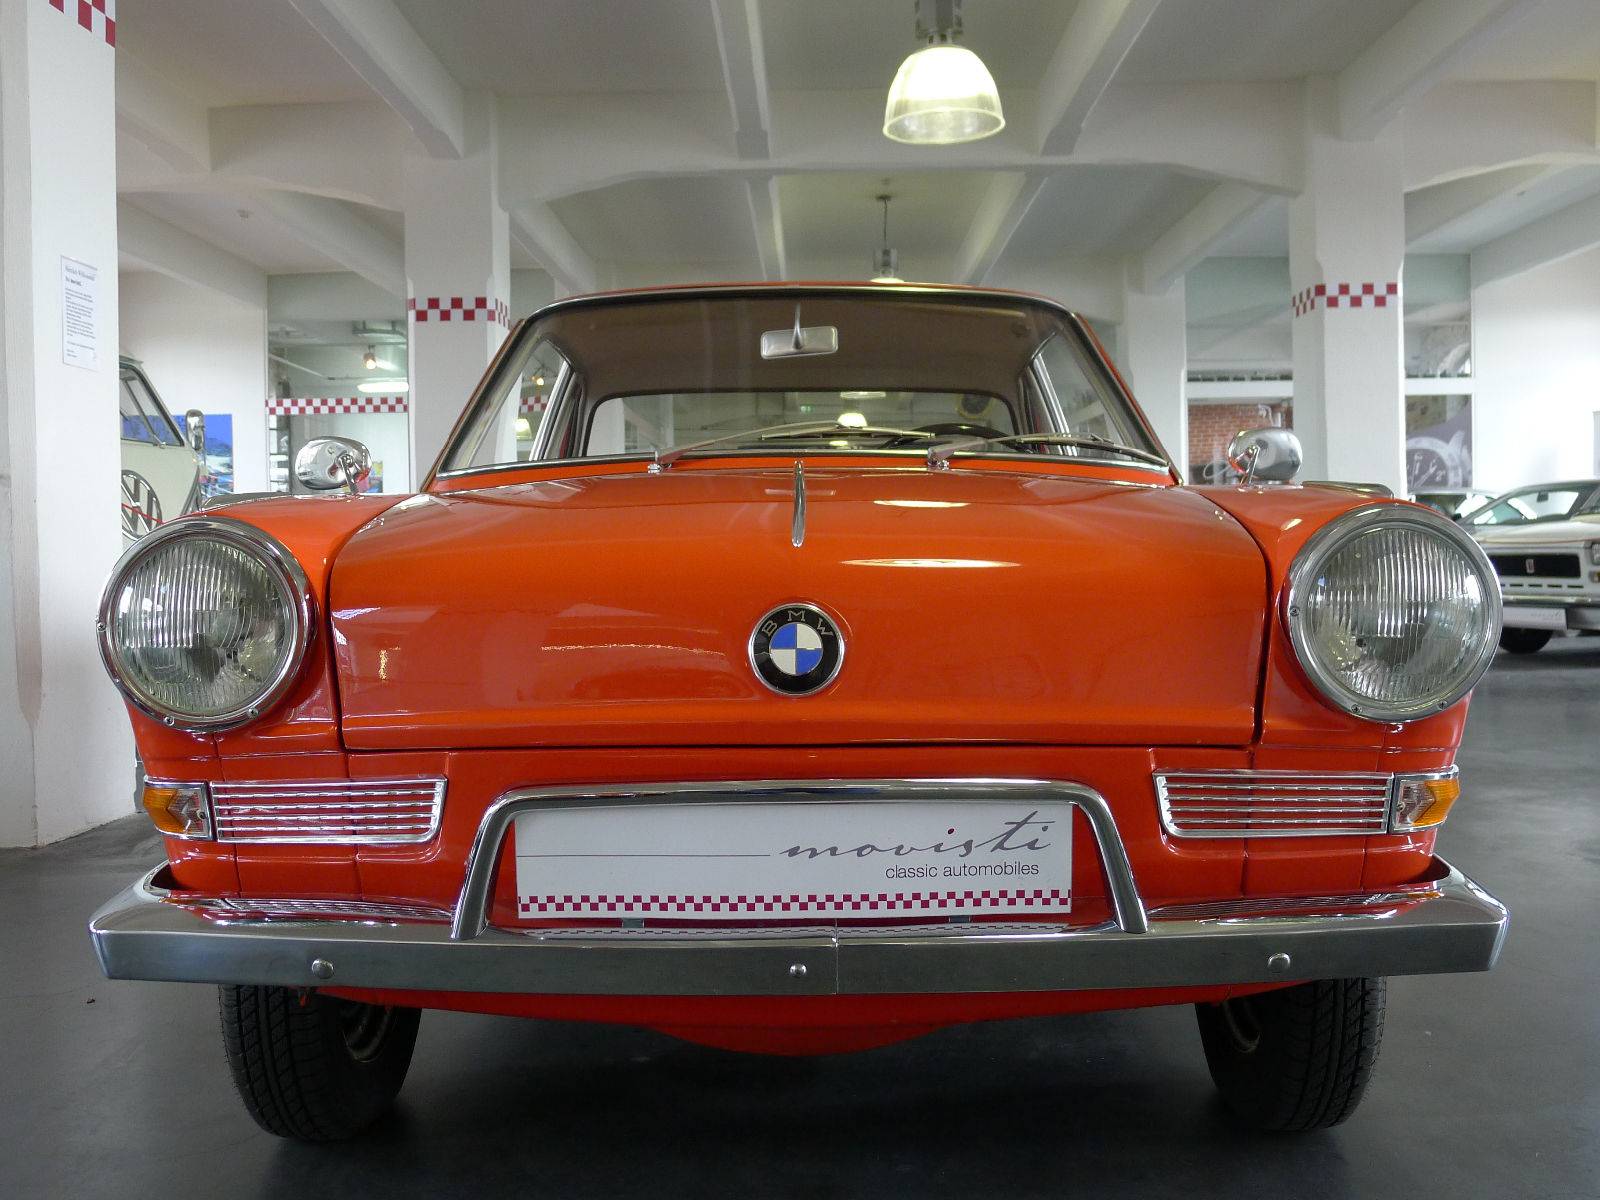 For Sale Bmw 700 Coupe 1963 Offered For Usd 26604